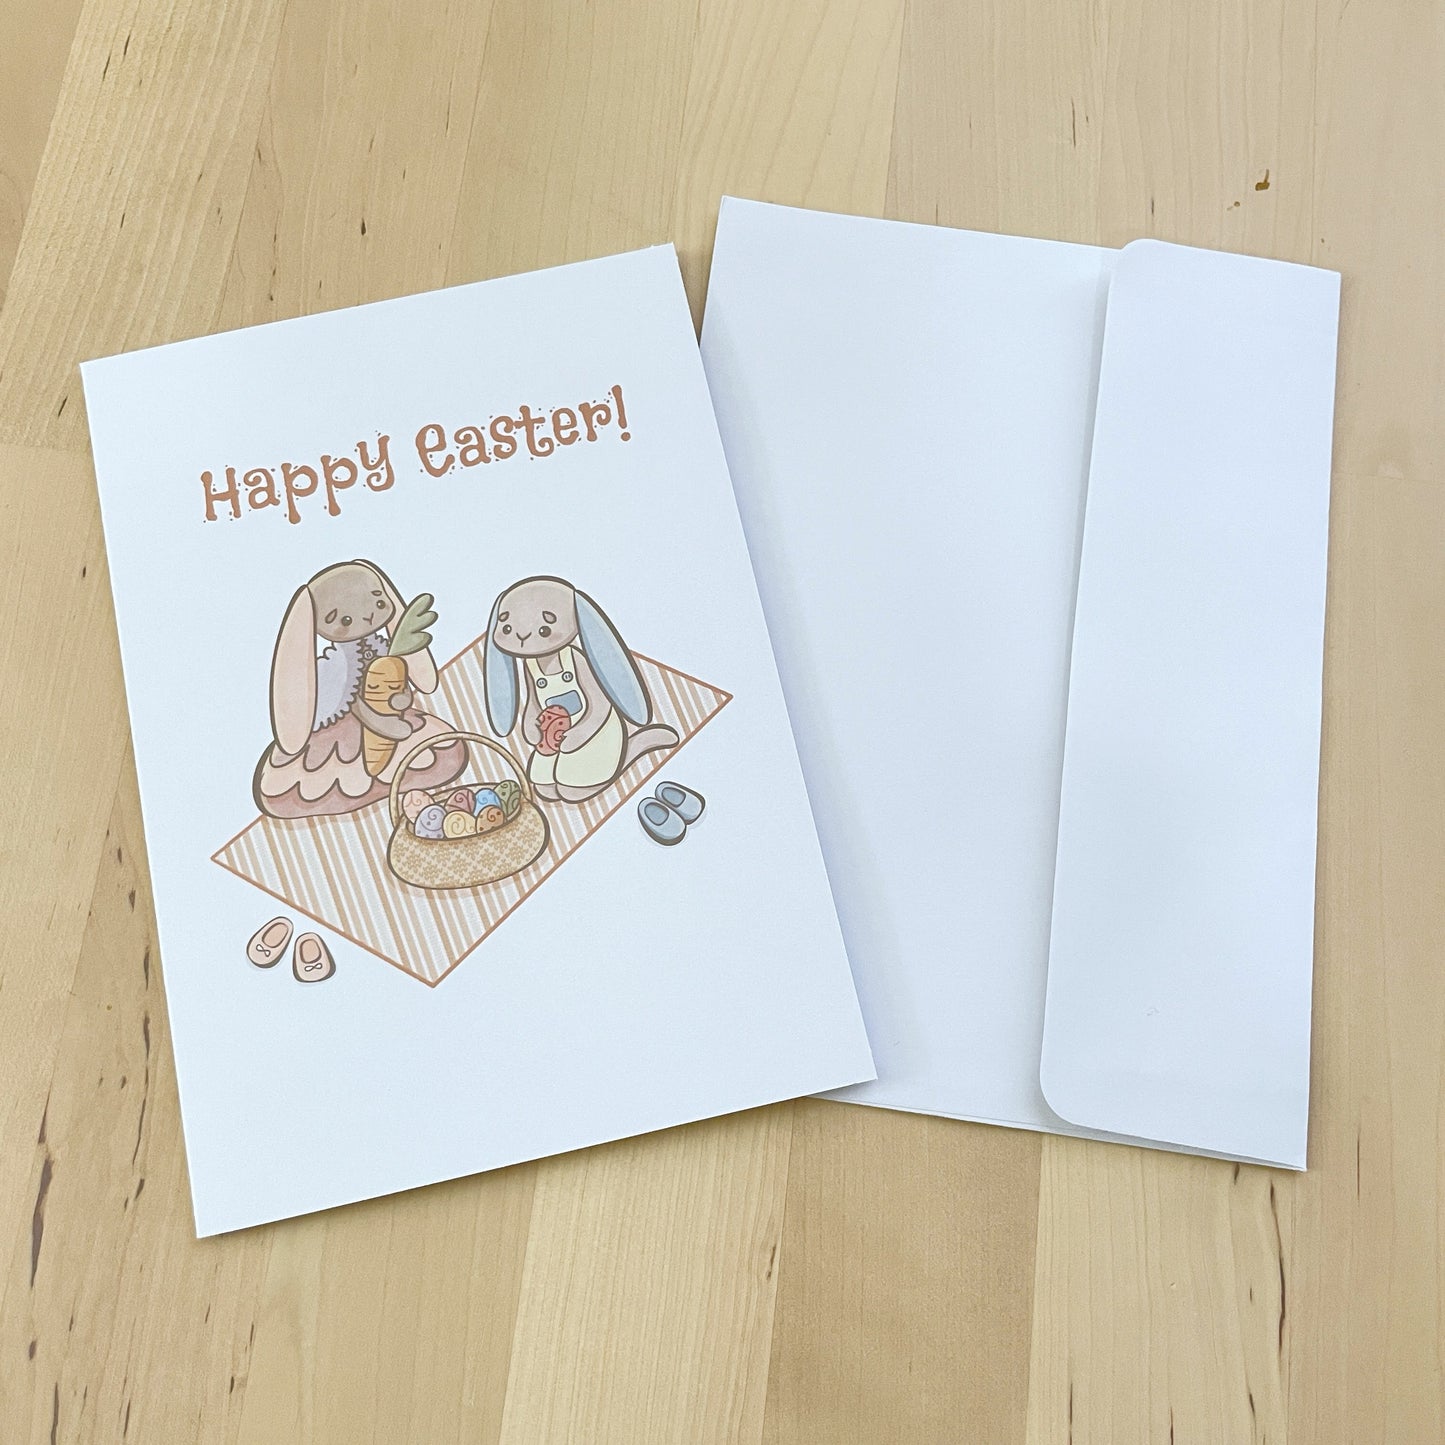 GREETING CARDS